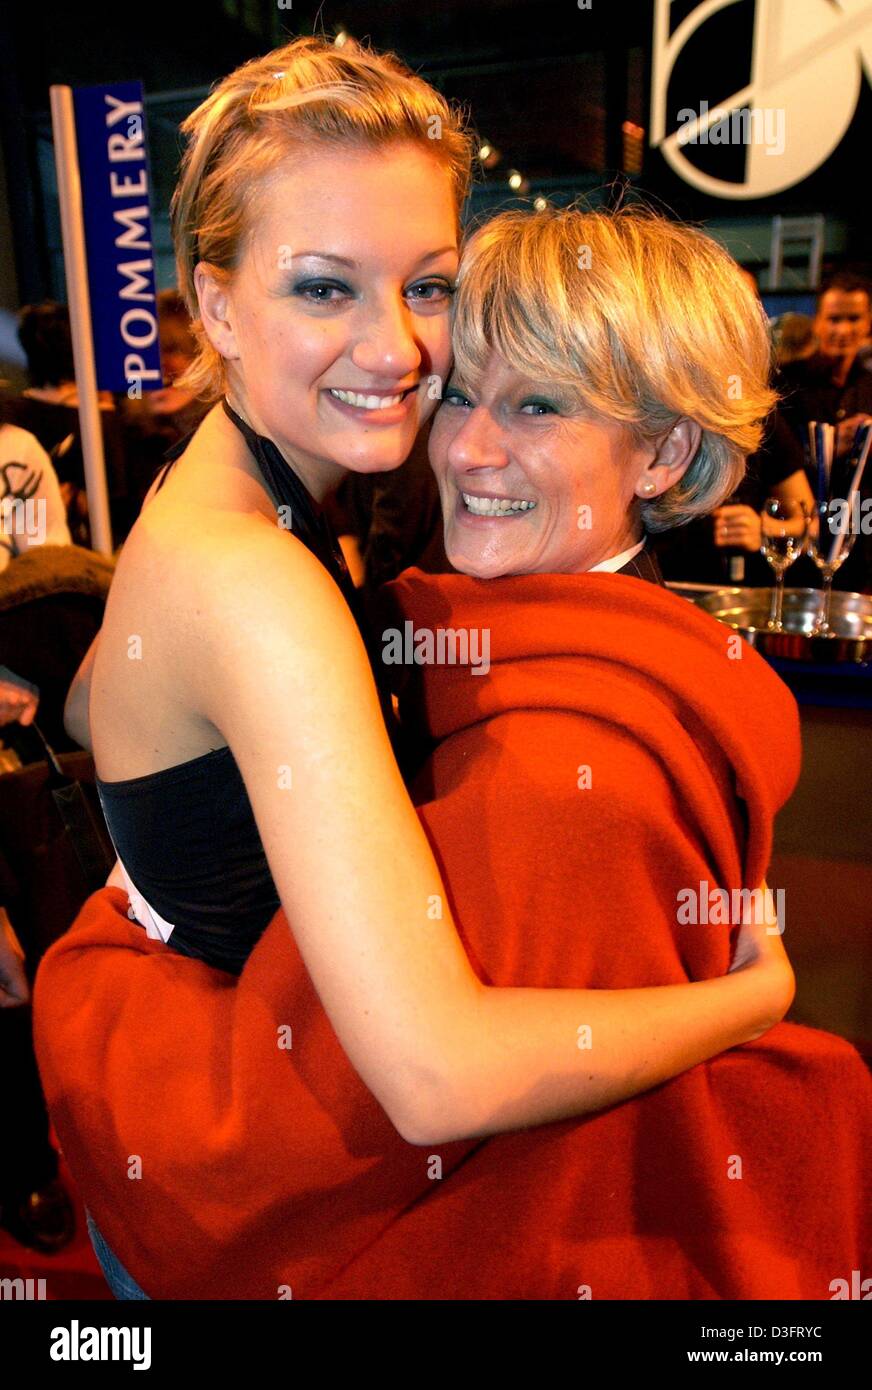 (dpa) - Juliette Schoppmann (L), the finalist of the TV casting competition 'Deutschland sucht den Superstar' (Germany looks for the superstar), the German version of the British show 'Pop Idol', is hugged by her mother Brigitte in Cologne, Germany, 8 March 2003. Juliette took second place in the competition. Stock Photo